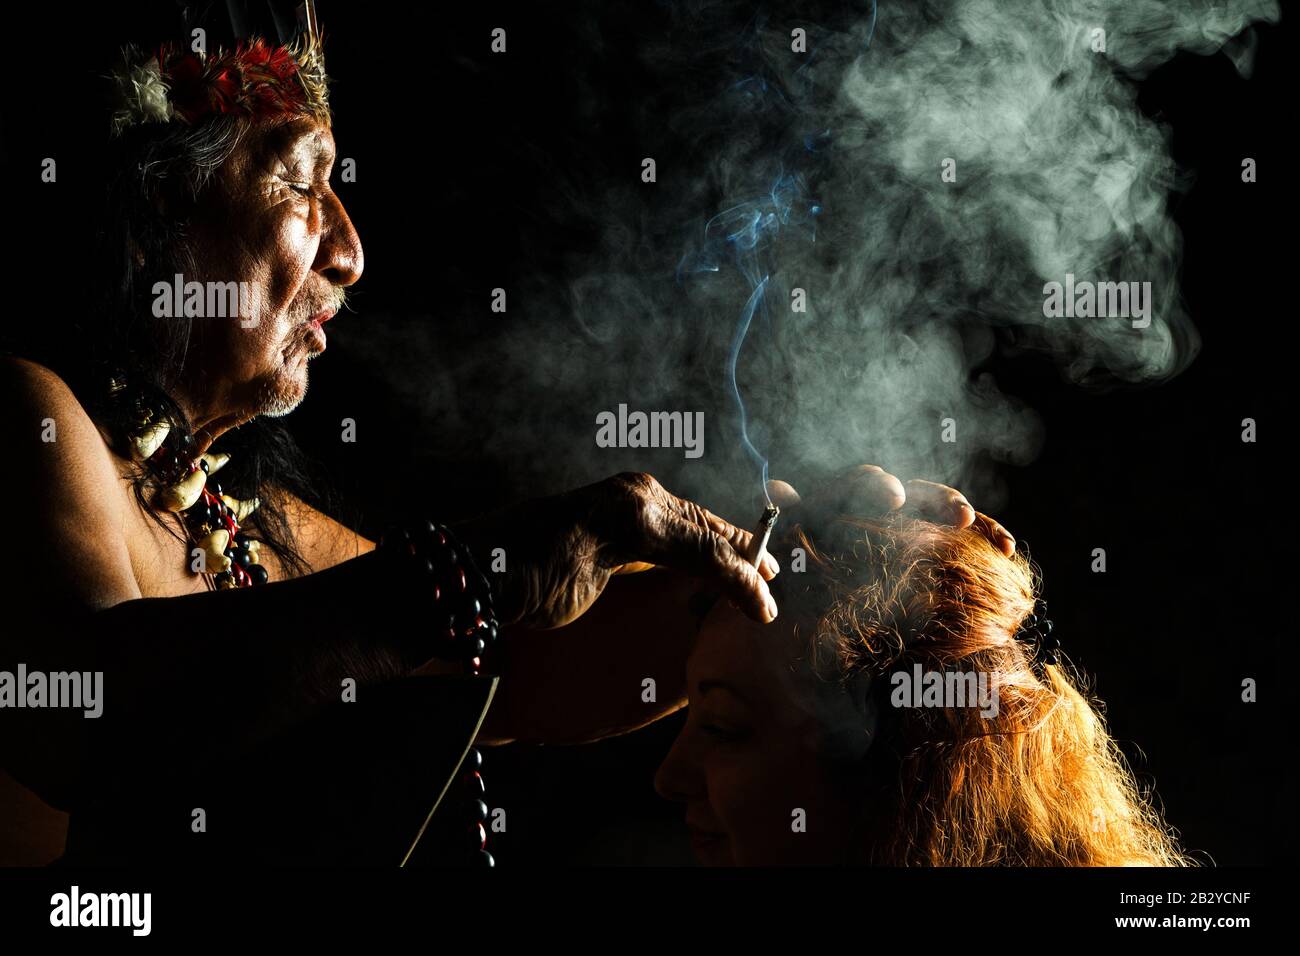 Voodoo In Ecuadorian Amazonia During A Real Ayahuasca Ceremonial Model Released Picture As Seen In April 2015 Stock Photo